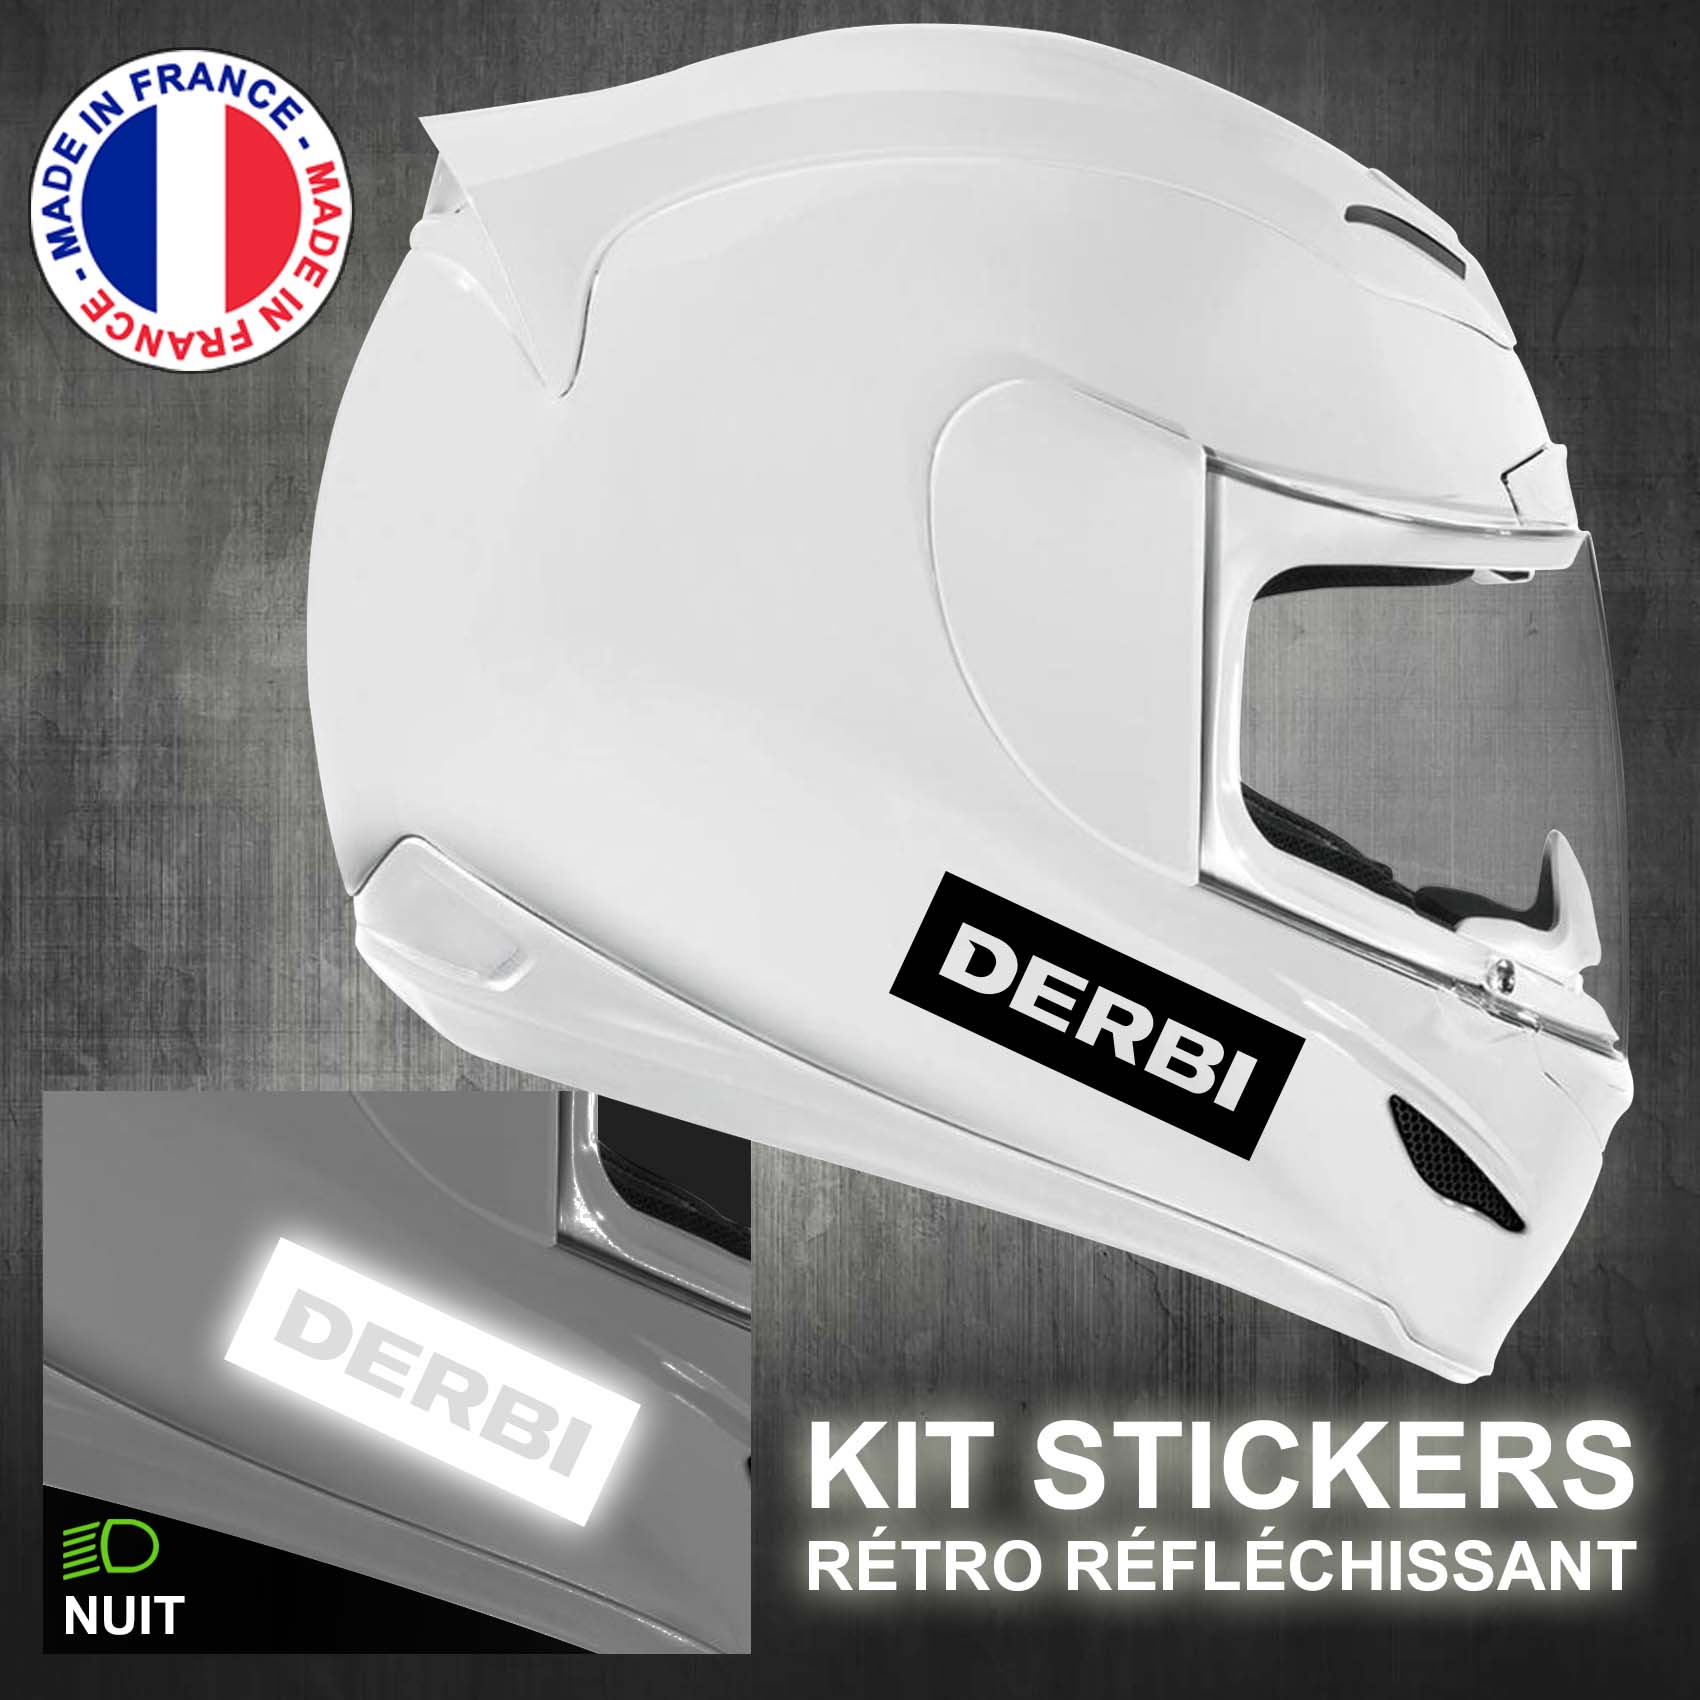 stickers-casque-moto-derbi-ref1-retro-reflechissant-autocollant-moto-velo-tuning-racing-route-sticker-casques-adhesif-scooter-nuit-securite-decals-personnalise-personnalisable-min